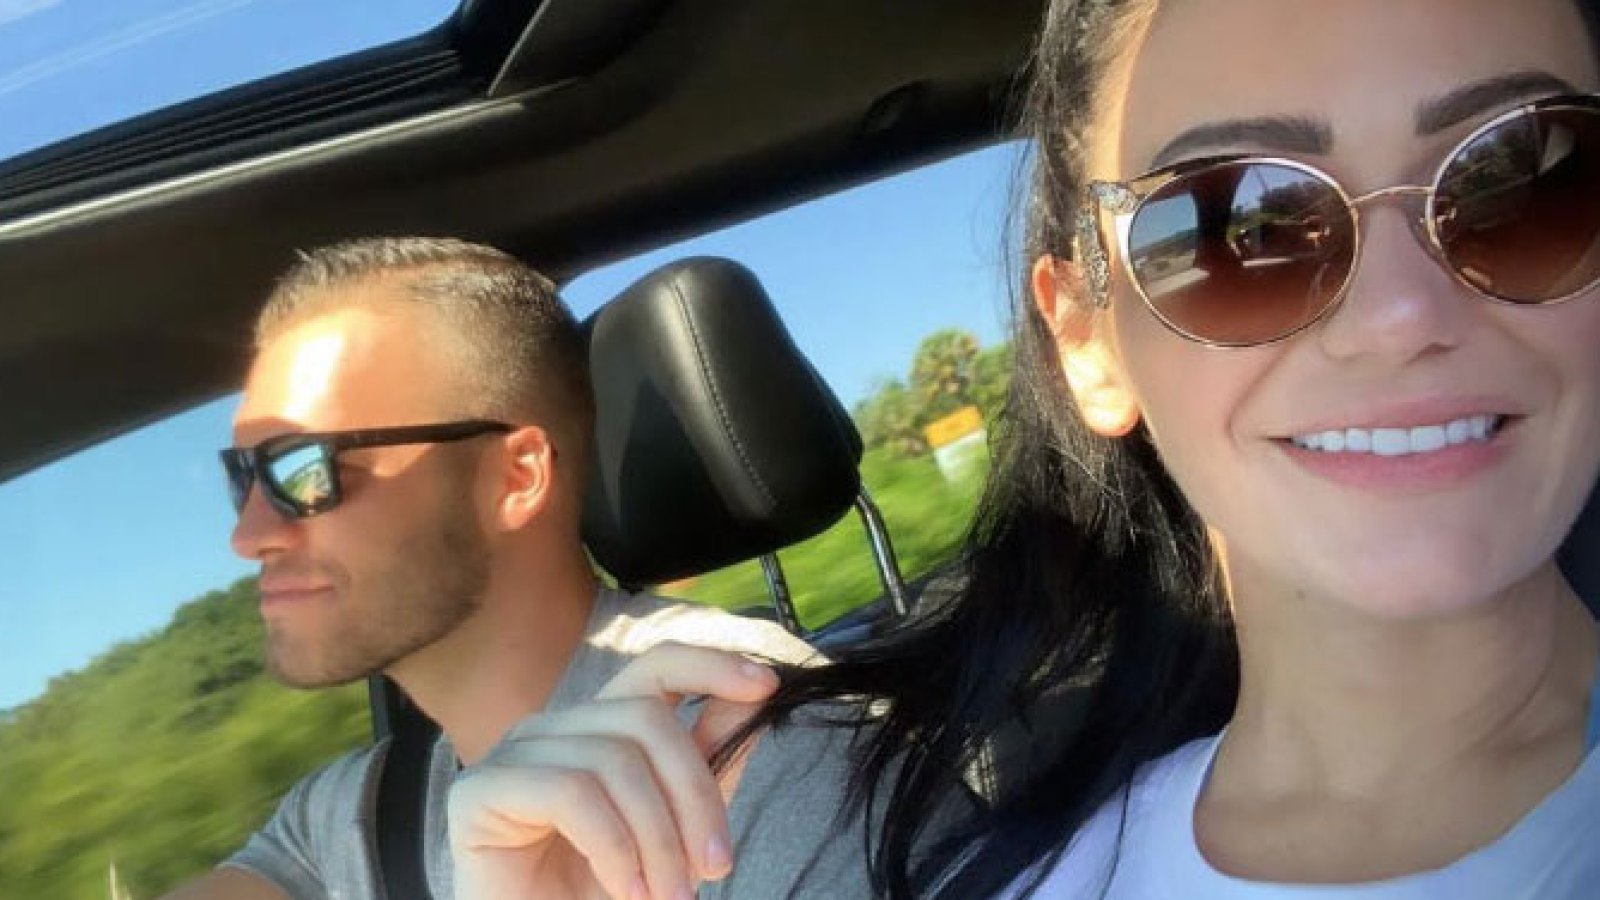 JWoww’s New BF Is ‘A Breath of Fresh Air’ Amid Divorce From Roger Mathews